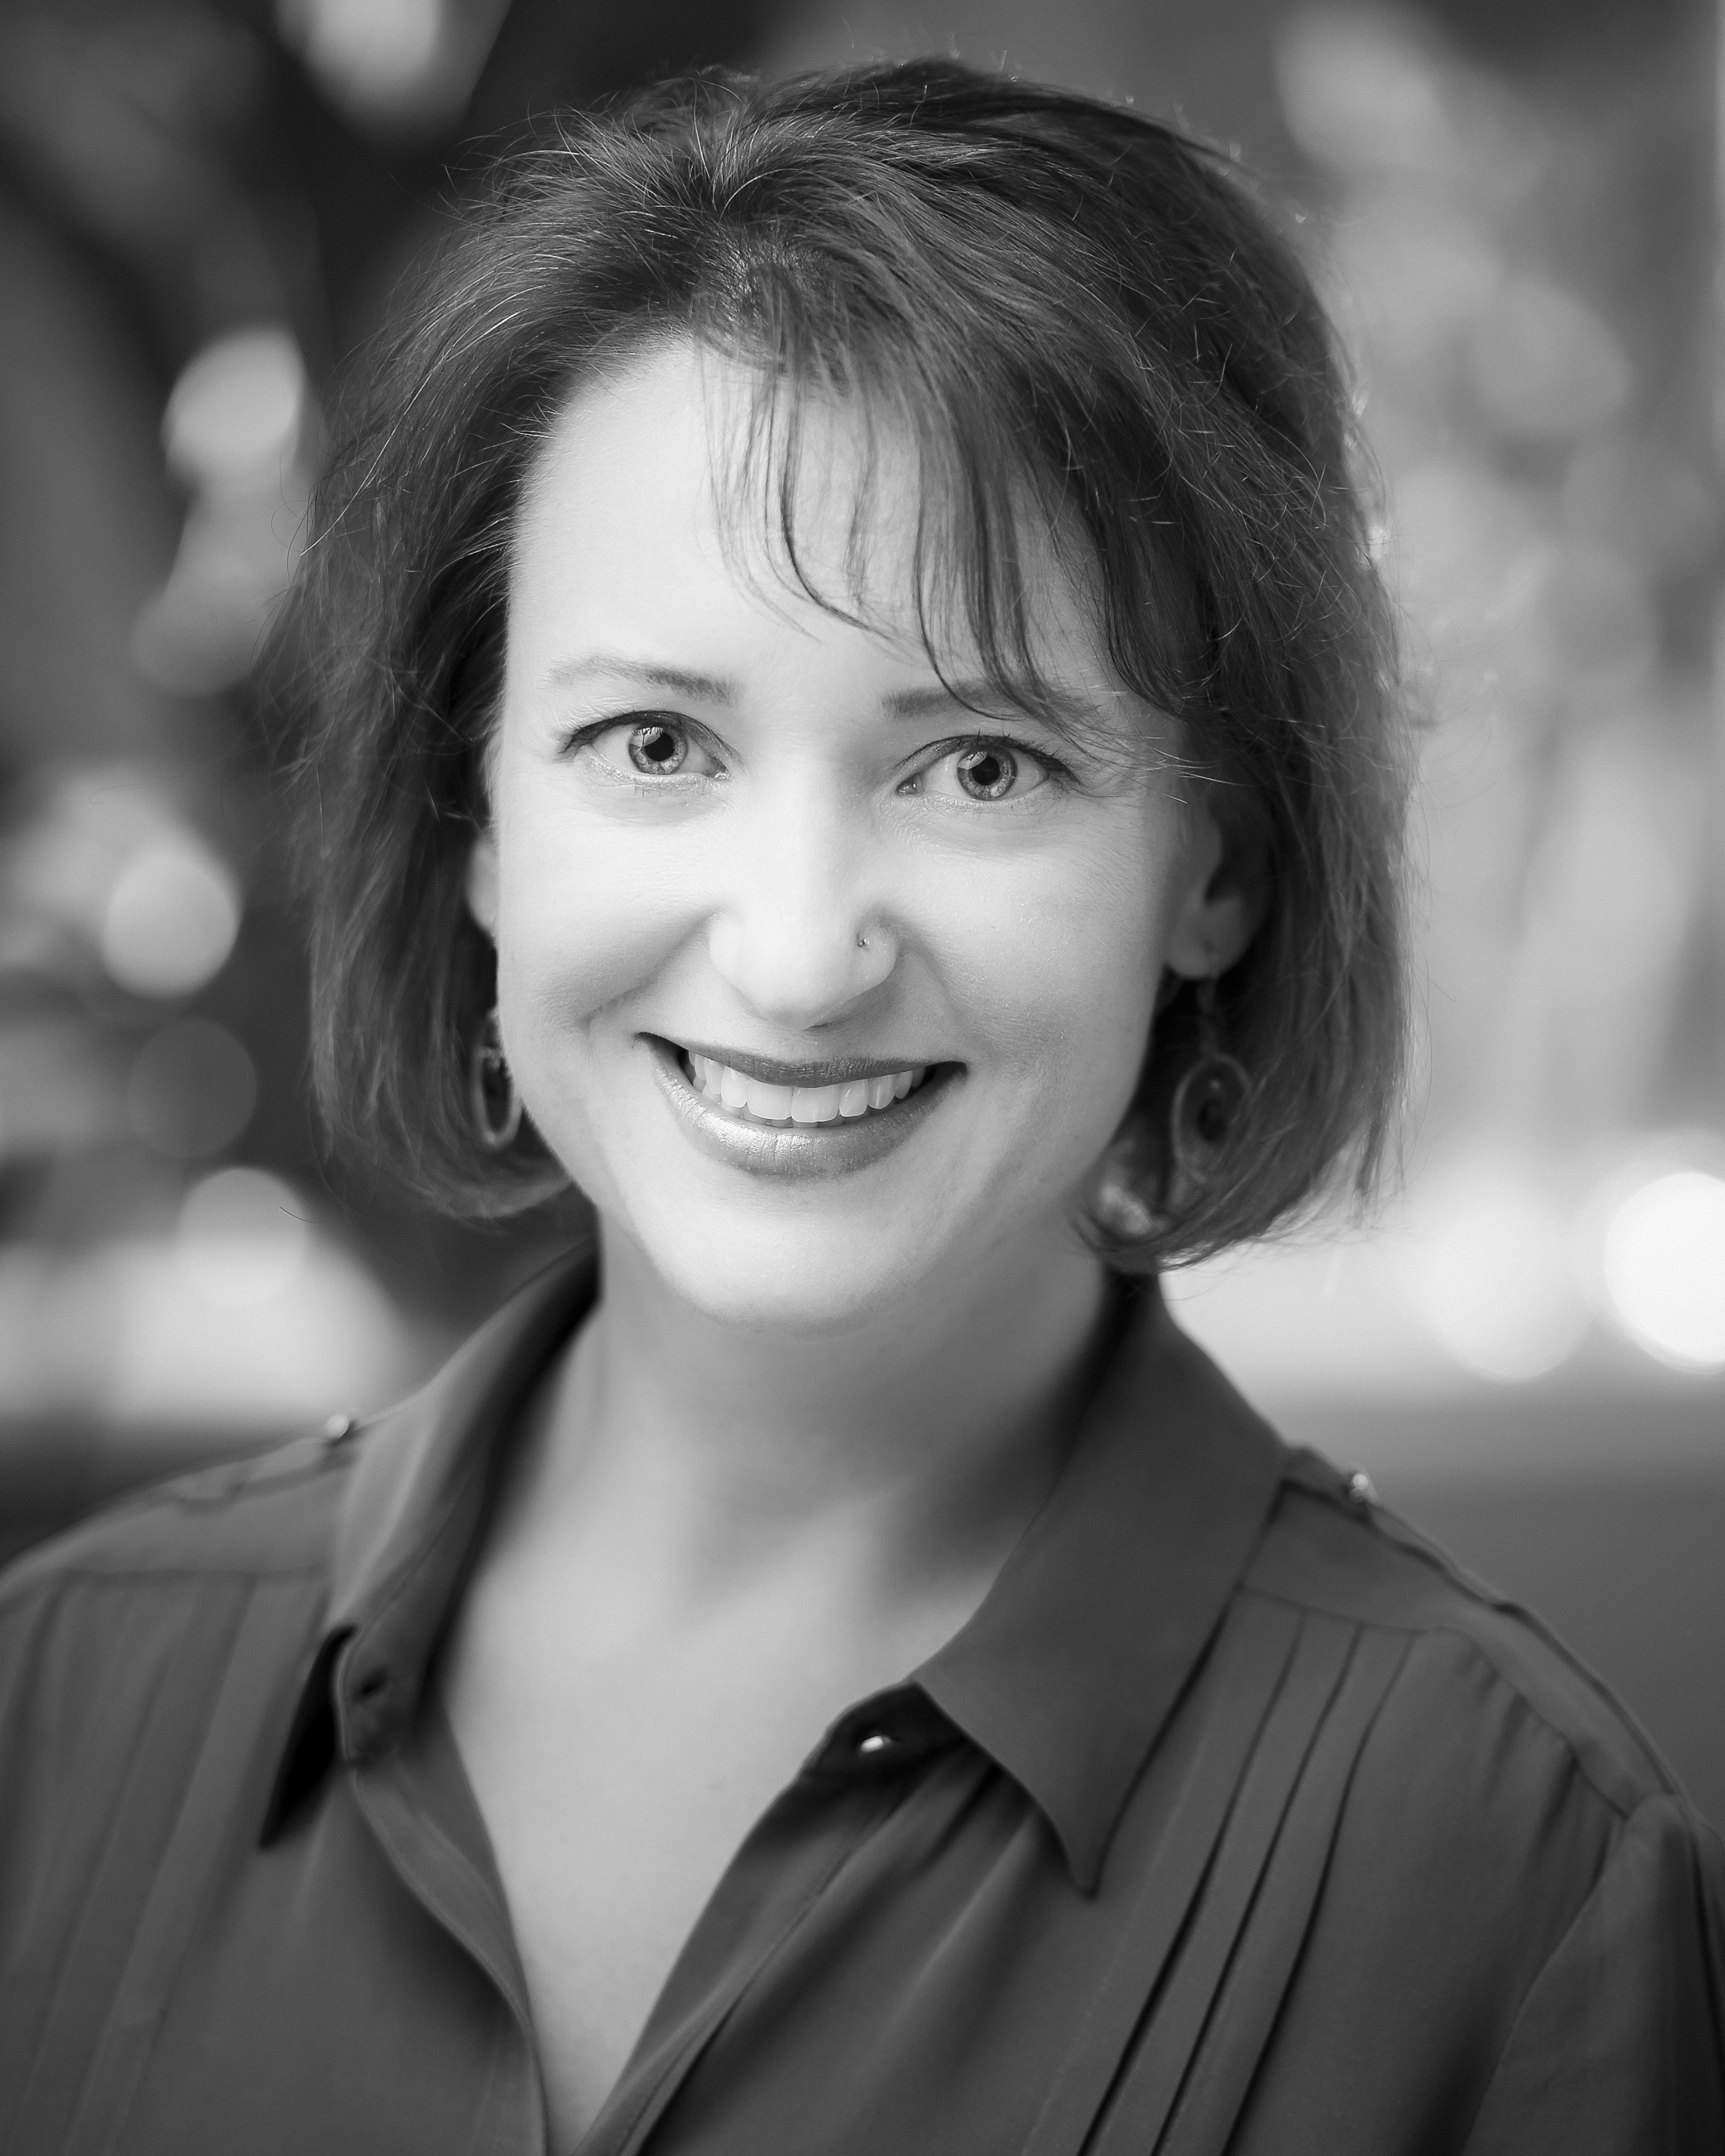 A black and white portrait of a smiling woman with short hair, standing in front of a softly blurred background that suggests lights or bokeh. her friendly expression and direct gaze create a warm and approachable atmosphere.